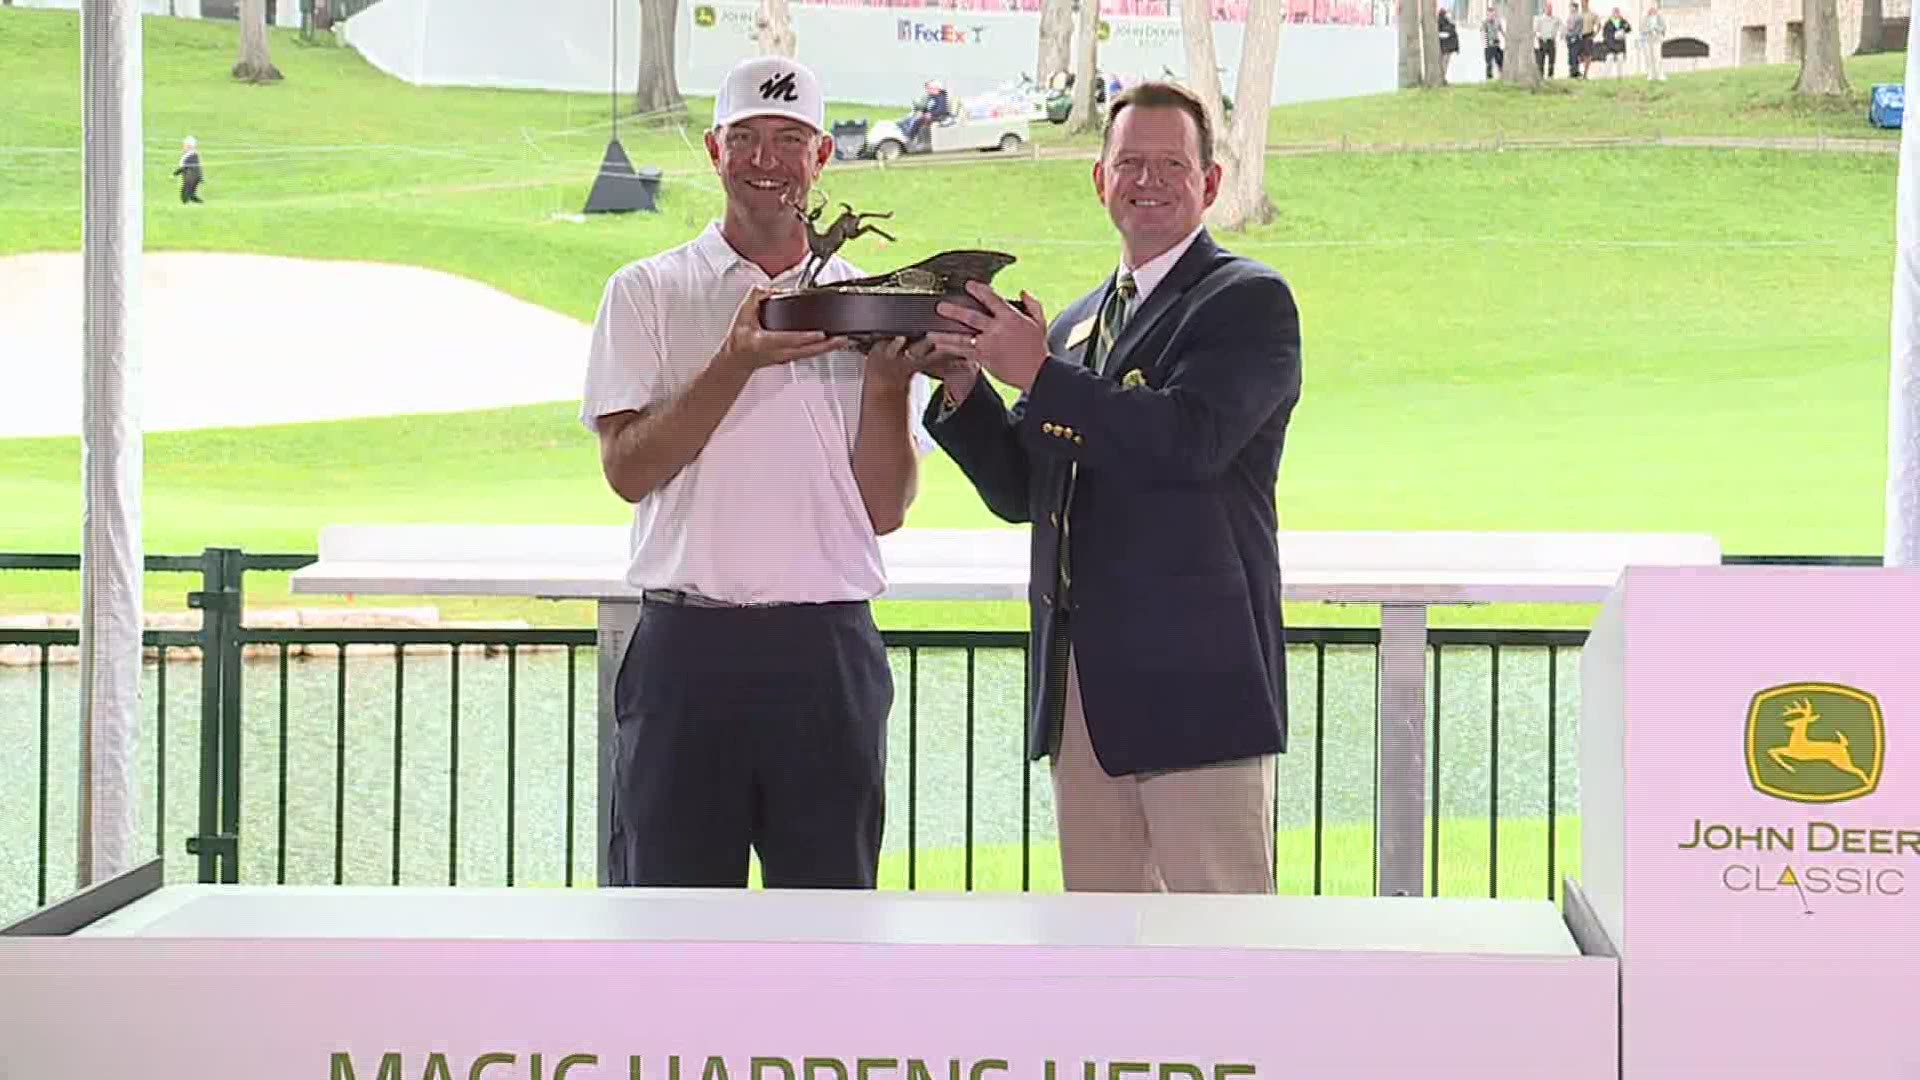 Lucas Glover won the 2021 John Deere Classic. He was presented with a check for more than $1.1 million and the bronze deer.